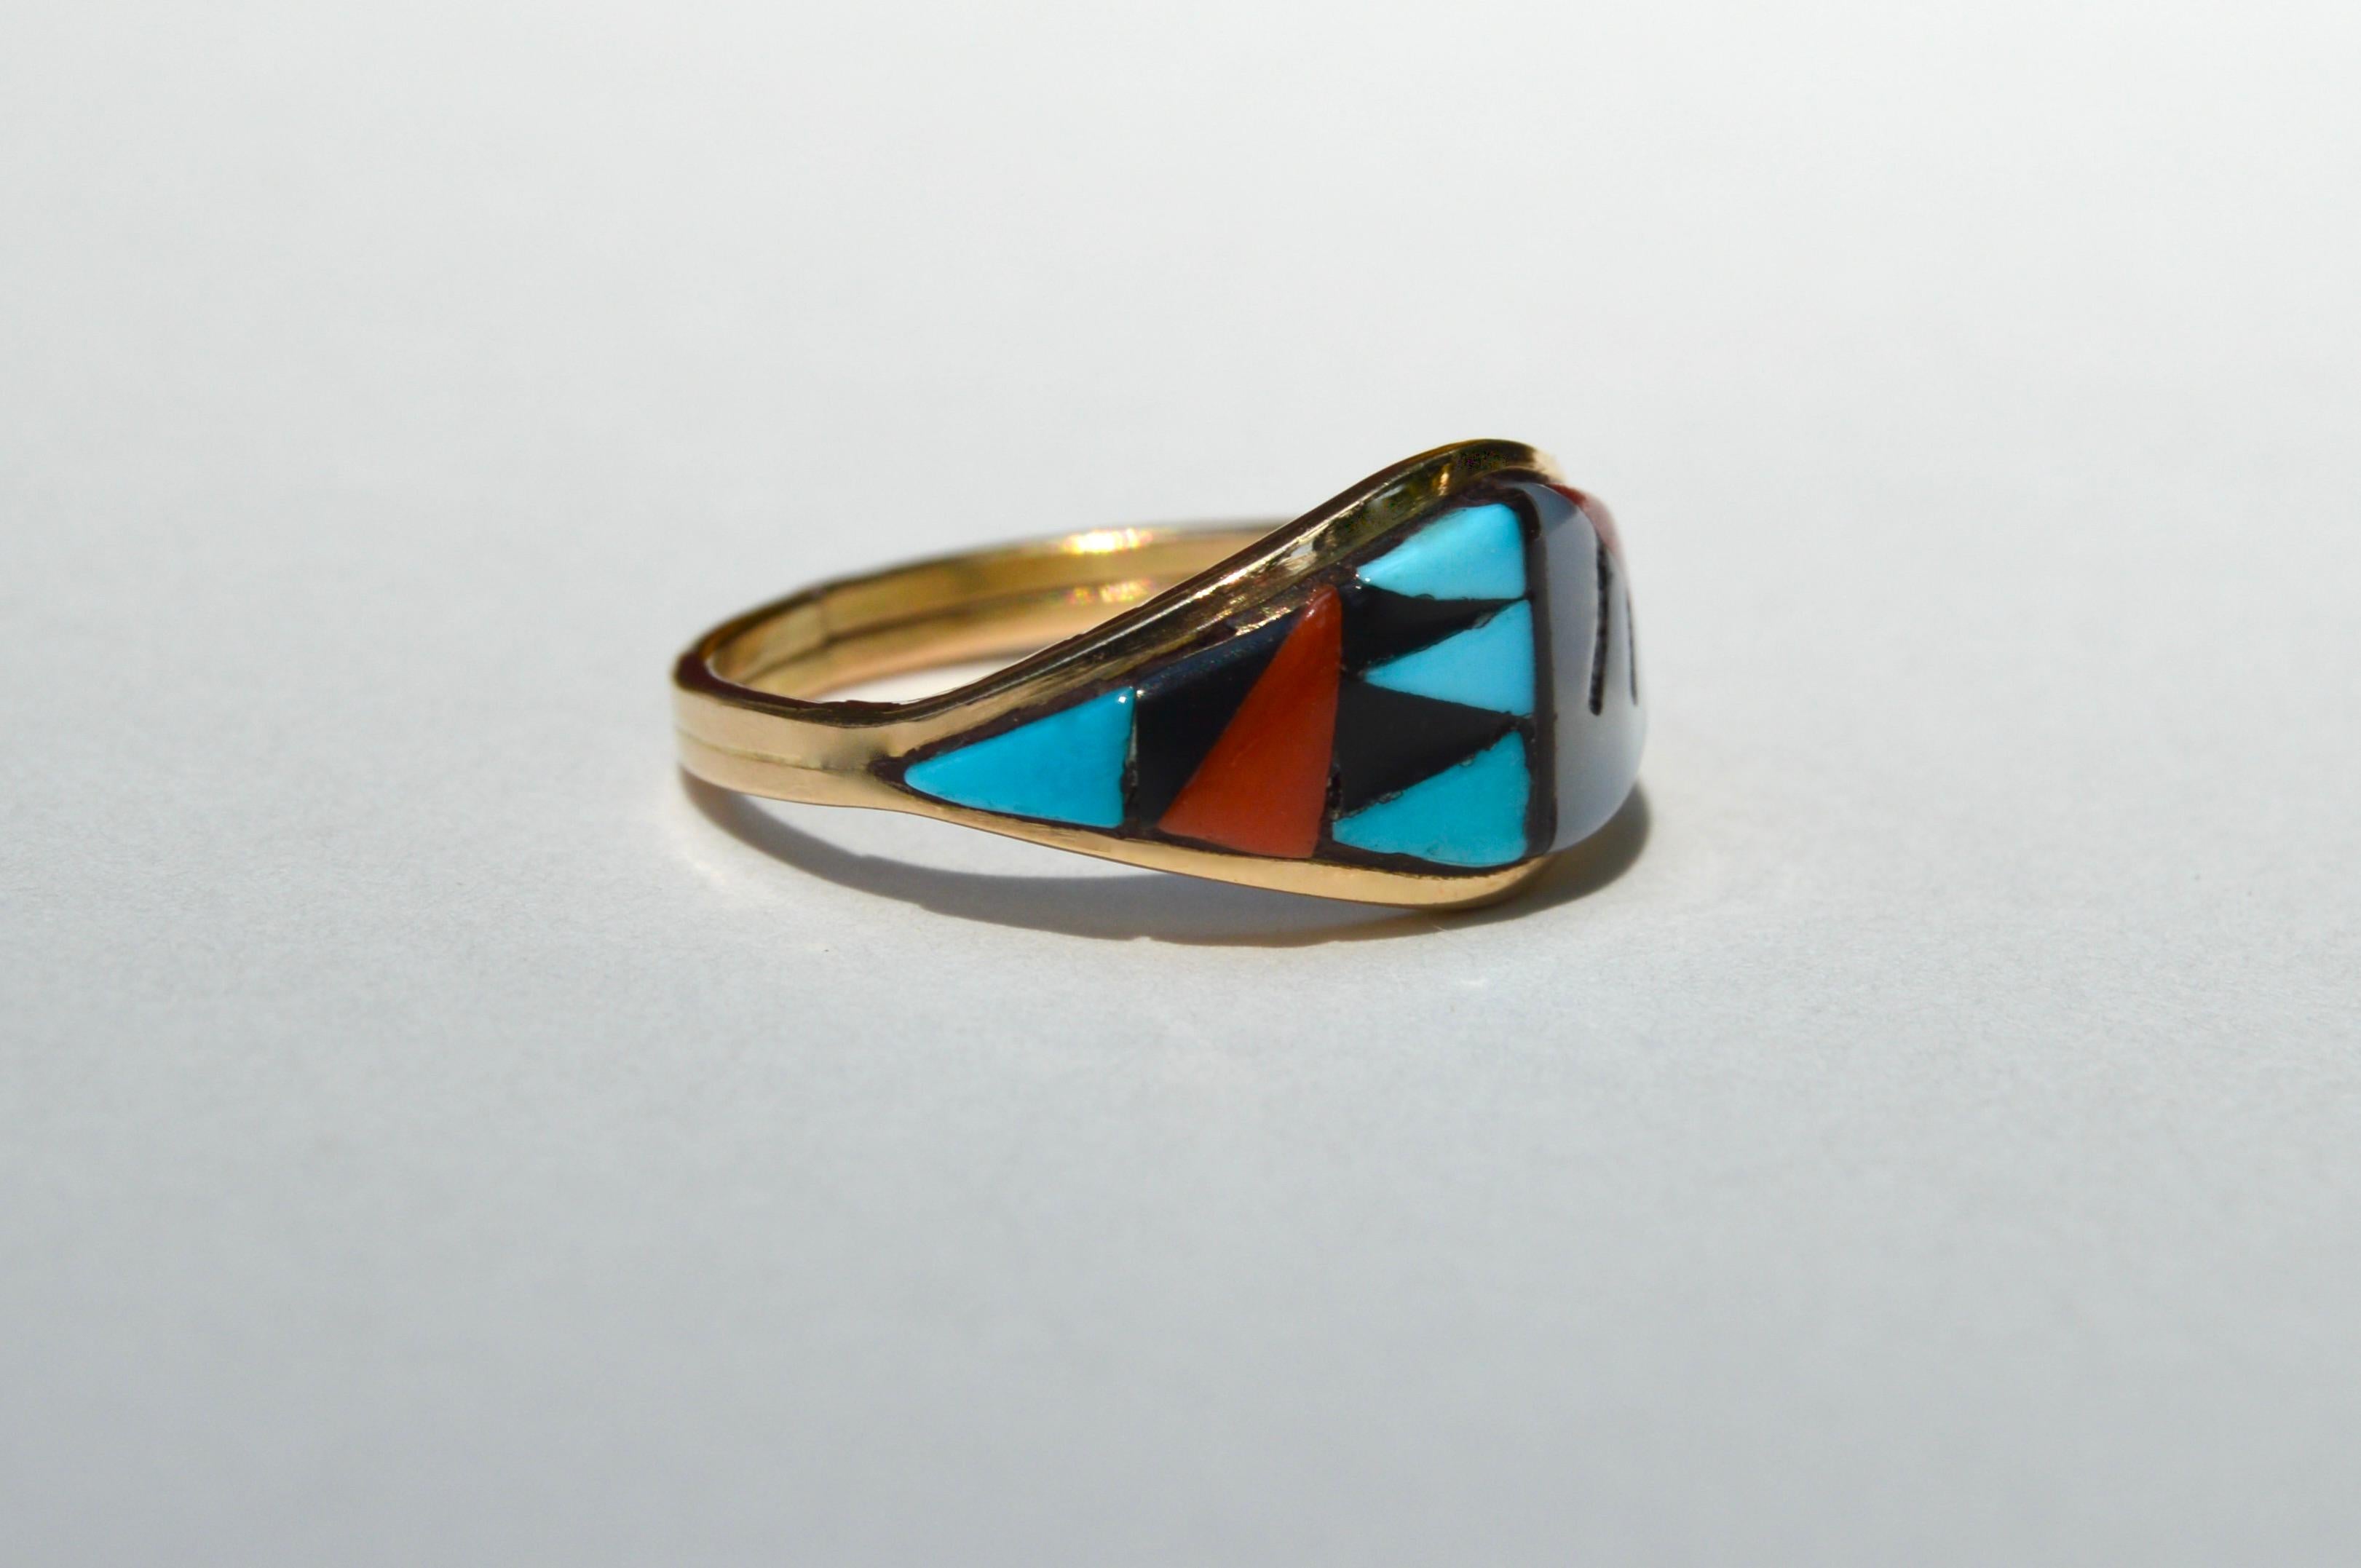 Vintage c1980s 14K yellow gold deadstock Navajo inlay band with onyx, turquoise, red coral and mother of pearl. Size 5.25. In very good condition, has faint resize mark at back of shank. Ring weighs 2.14 grams. Widest point at face measures 10mm.